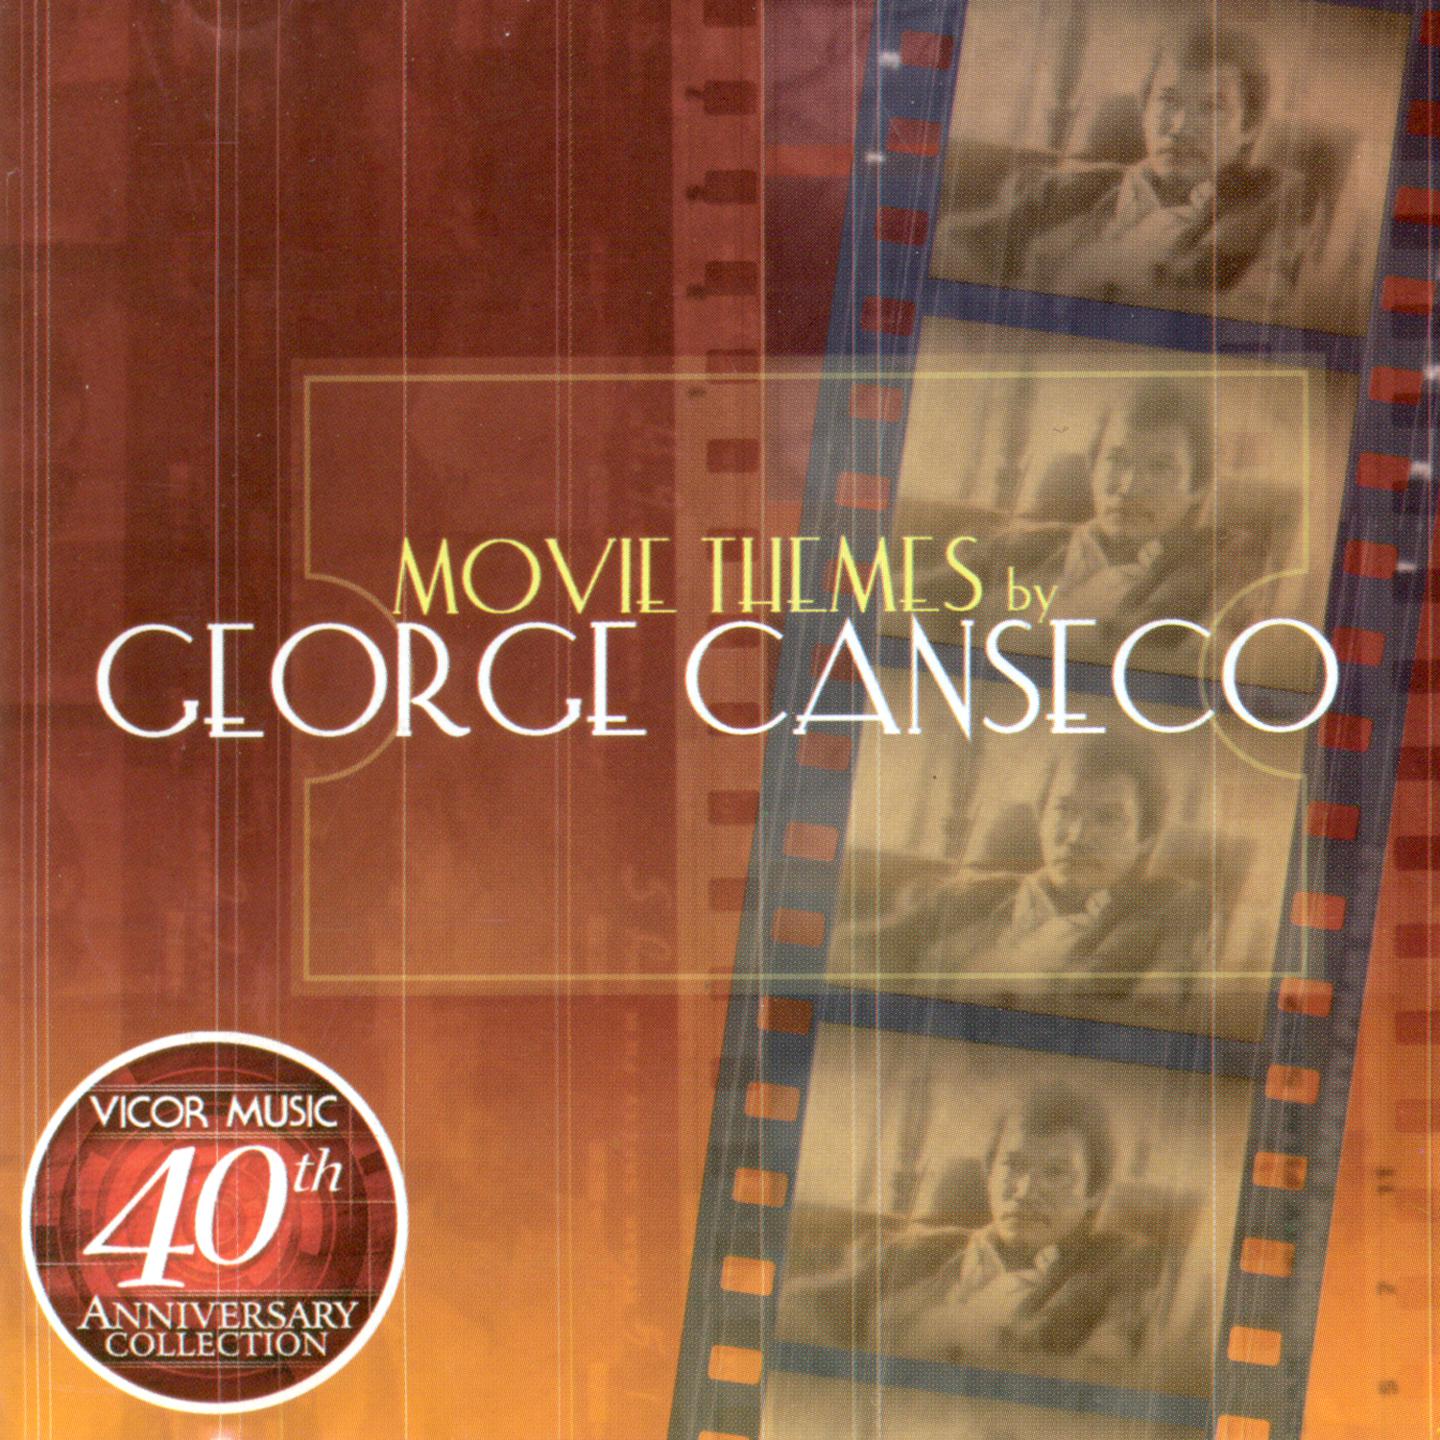 George Canseco Movie Themes (Vicor 40th Anniversary Collection)